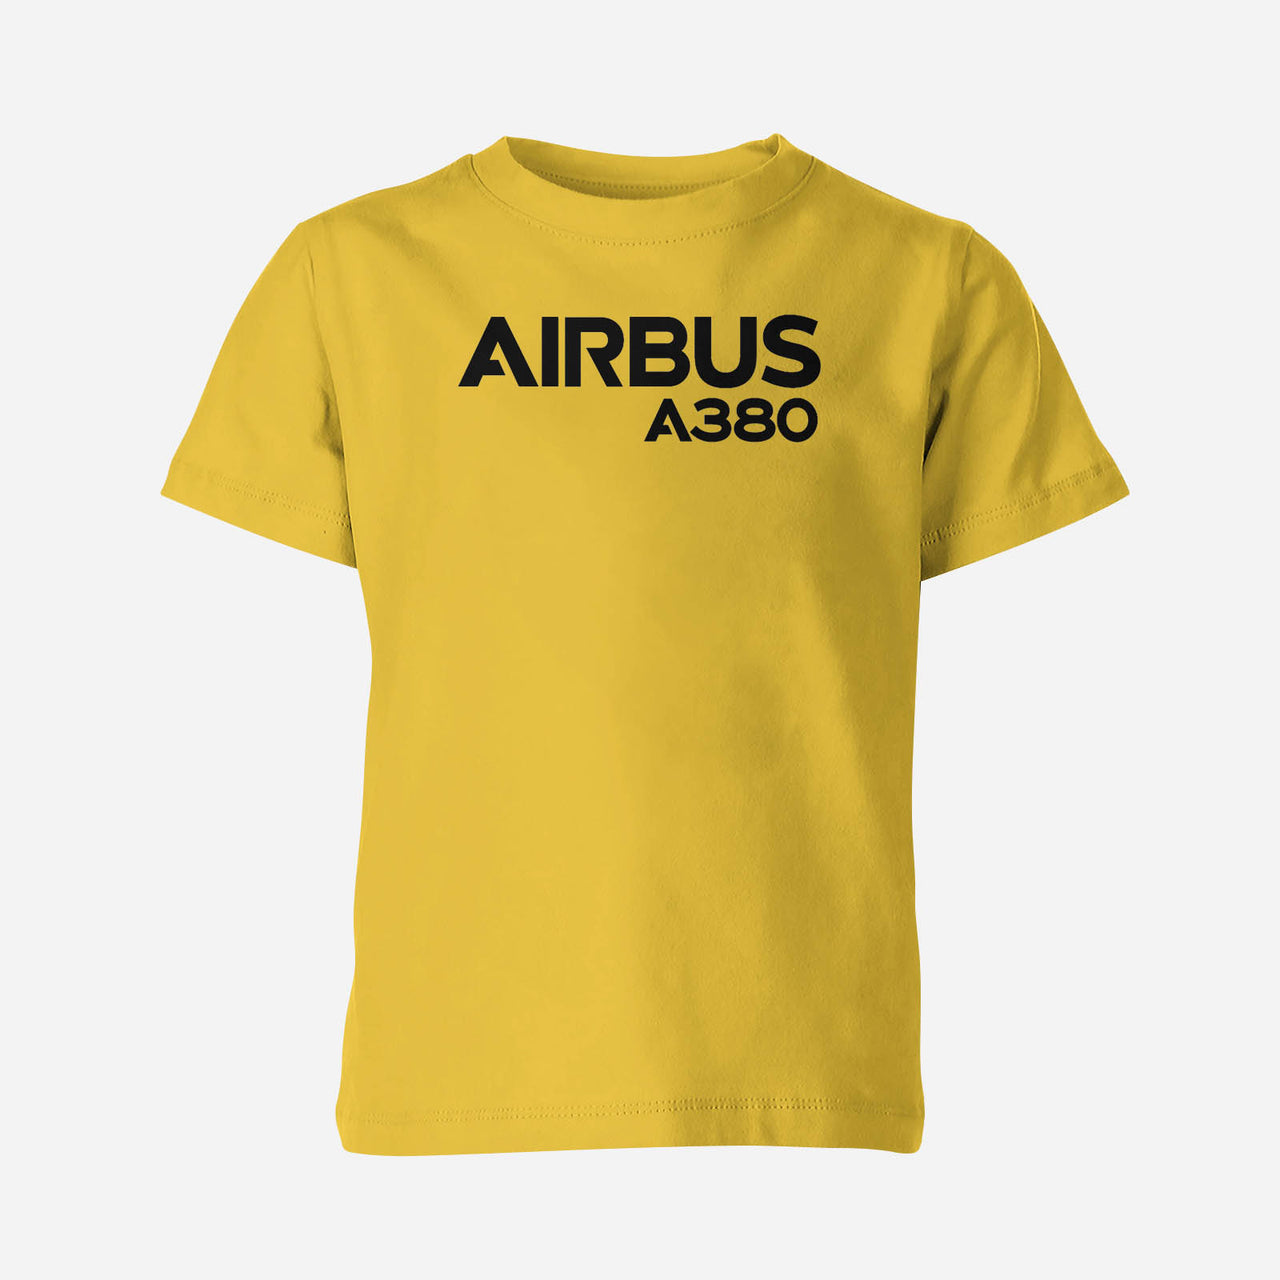 Airbus A380 & Text Designed Children T-Shirts